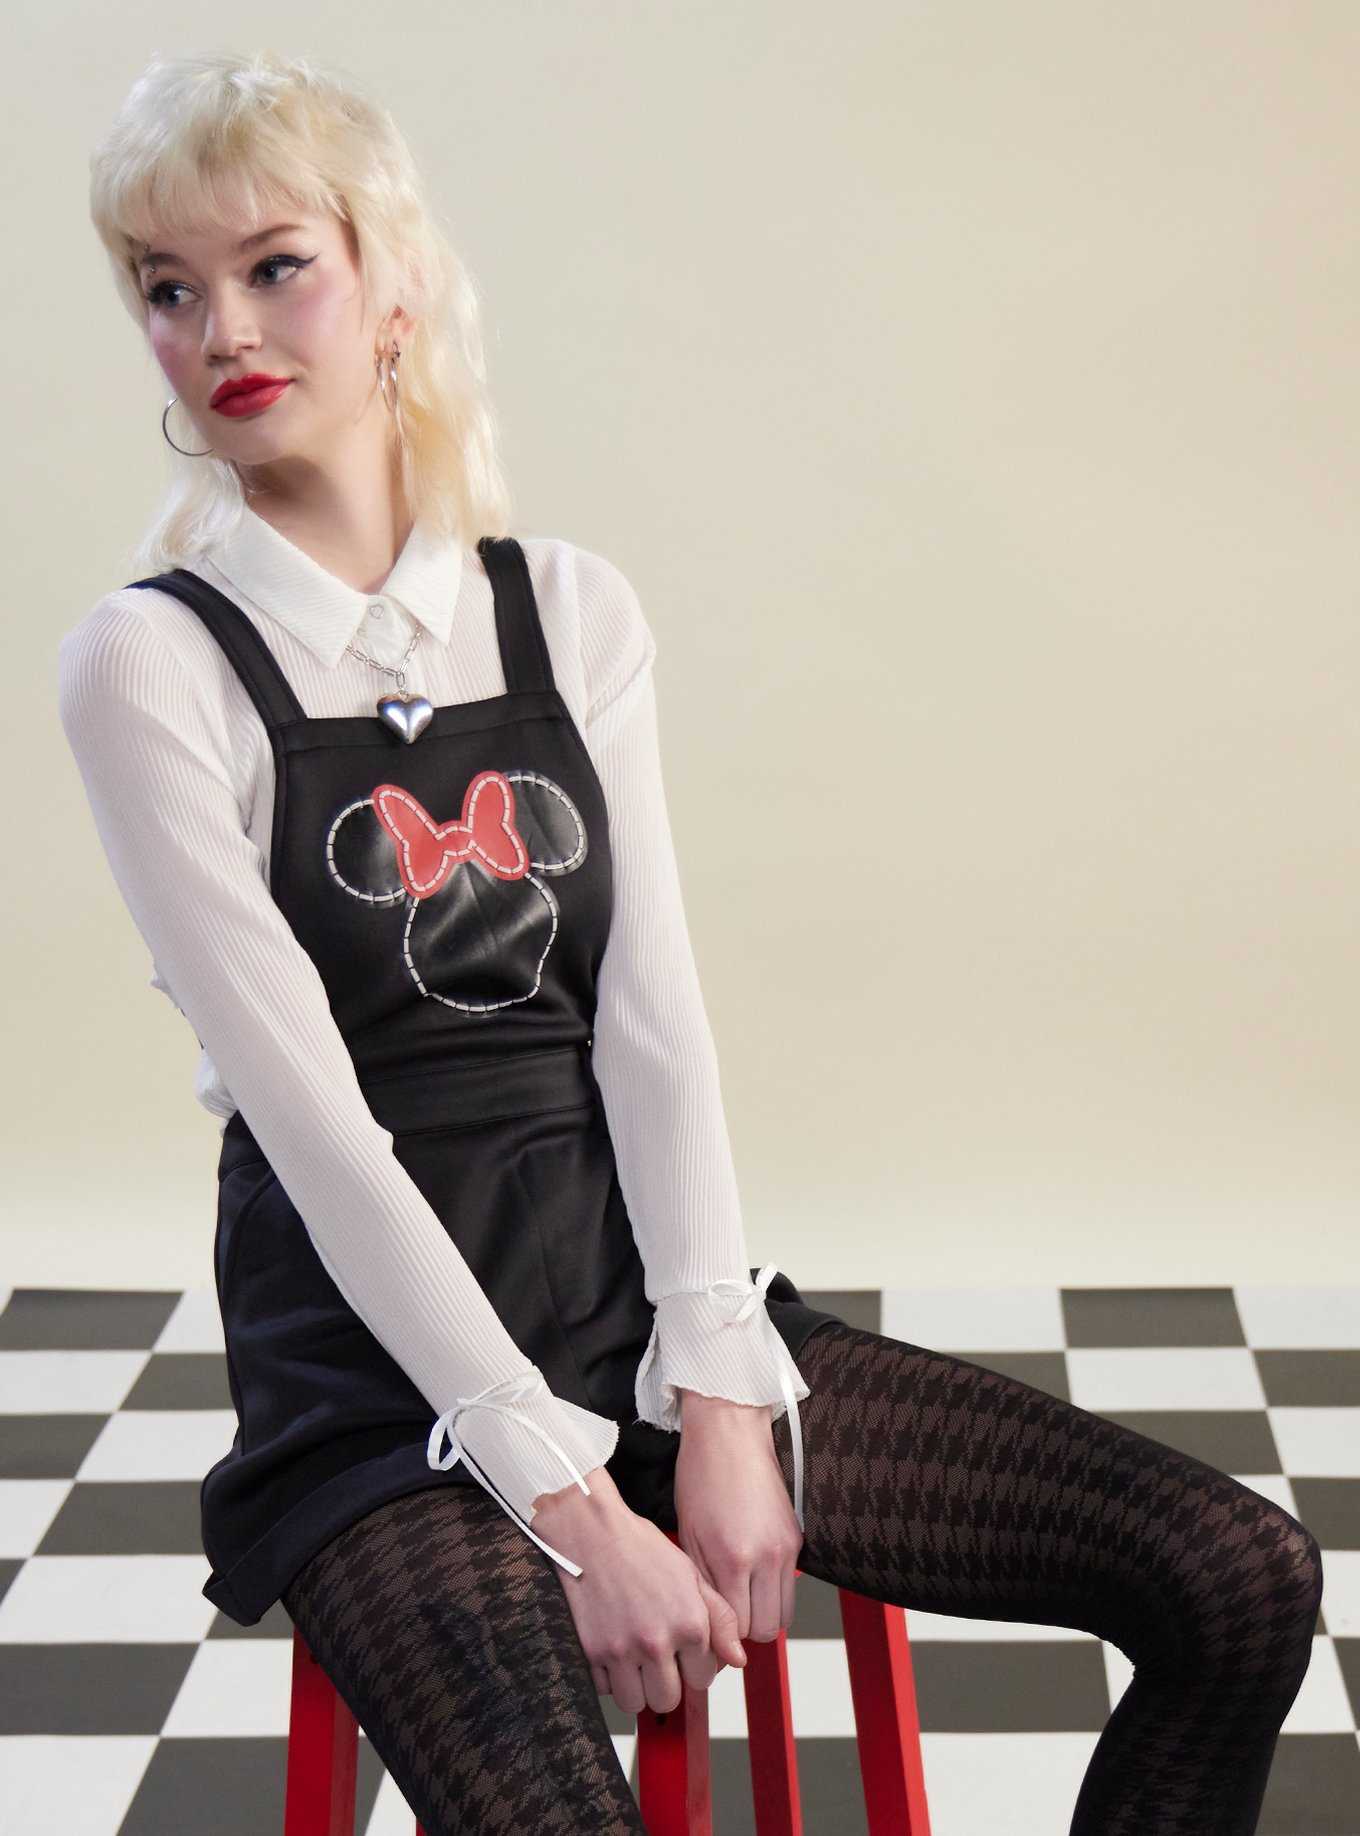 Sexy Woman Clothes Minnie Mouse Women's T-shirt Sleeveless Tank